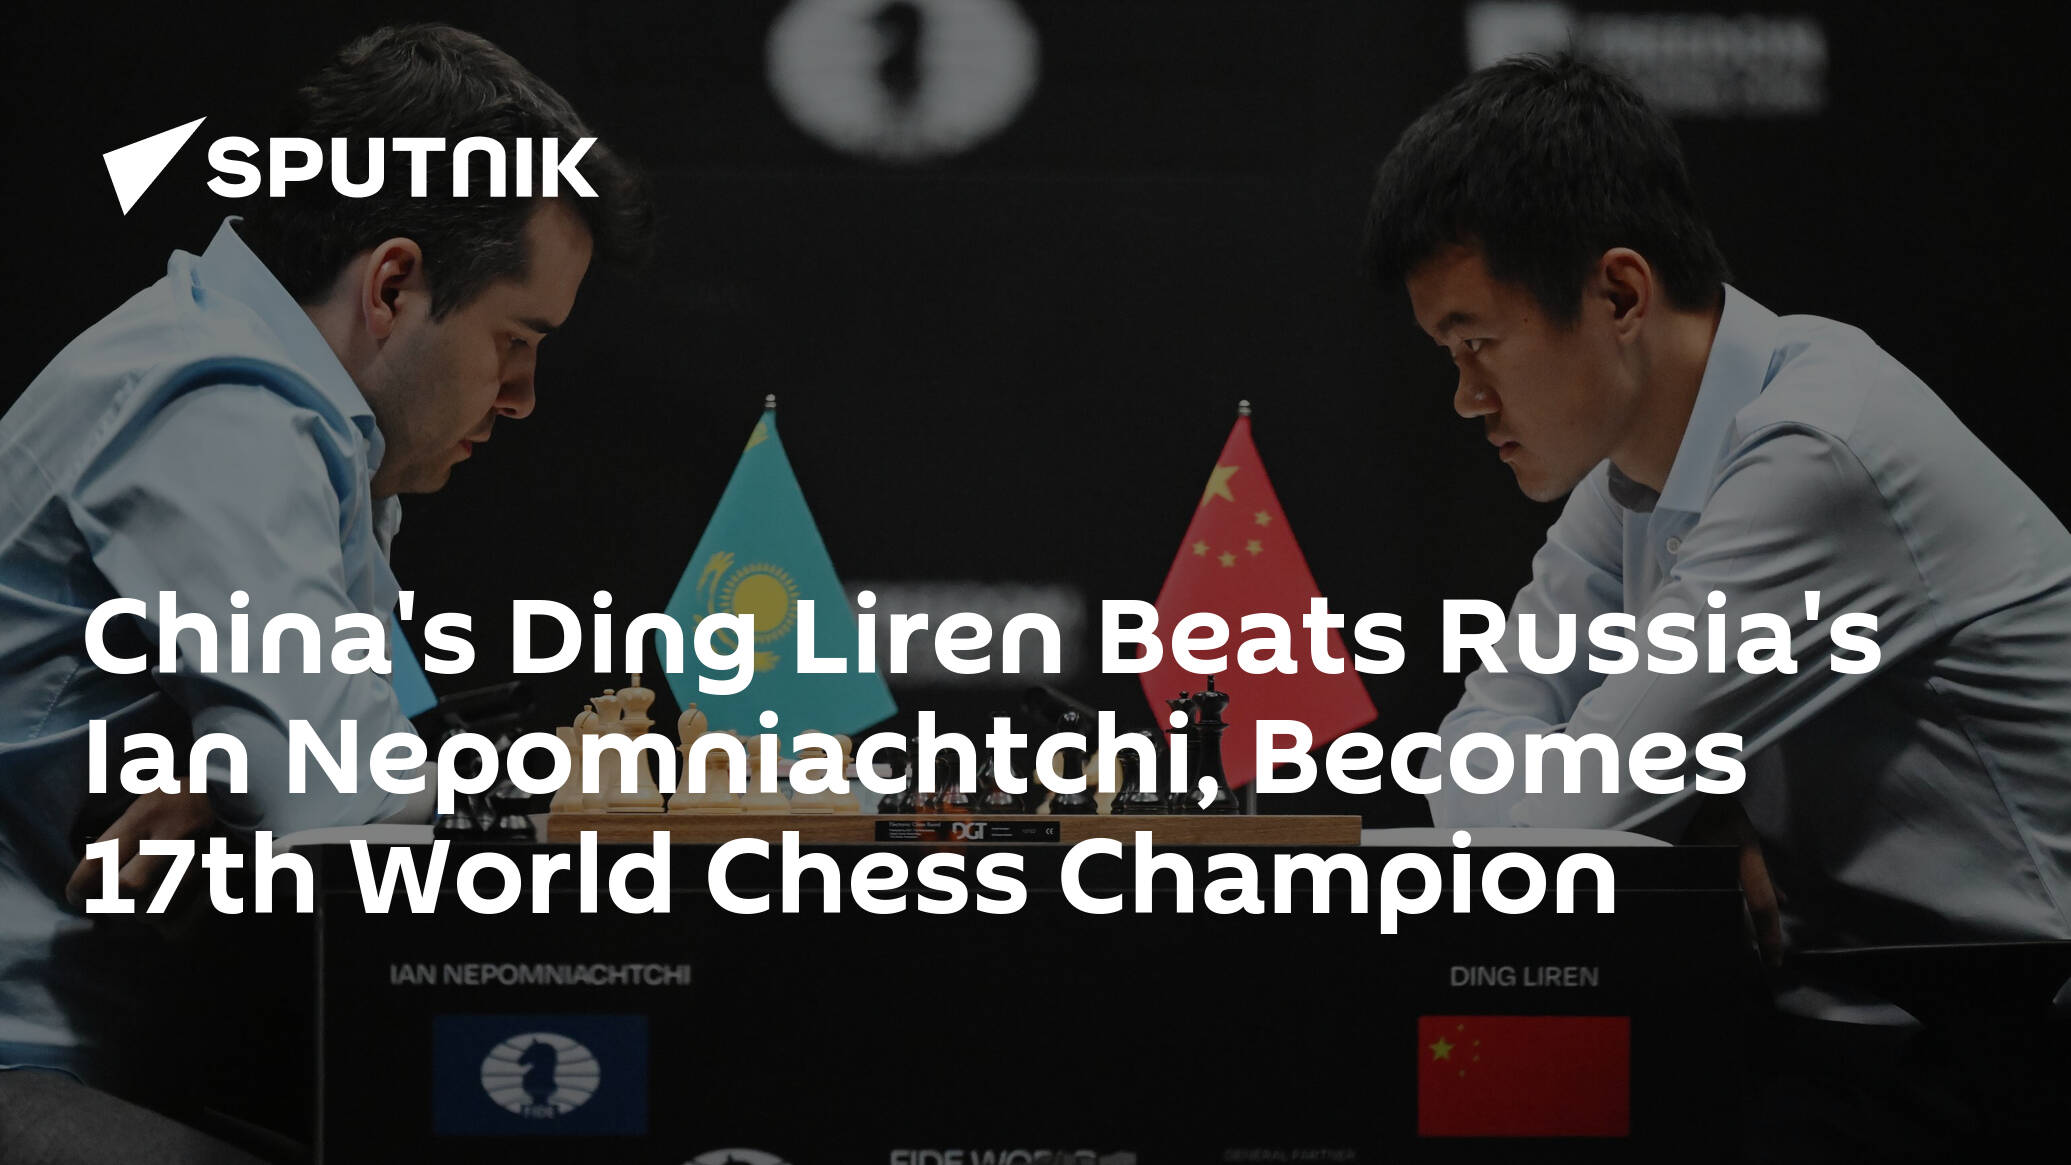 China's Ding Liren Beats Russia's Ian Nepomniachtchi, Becomes 17th World Chess Champion